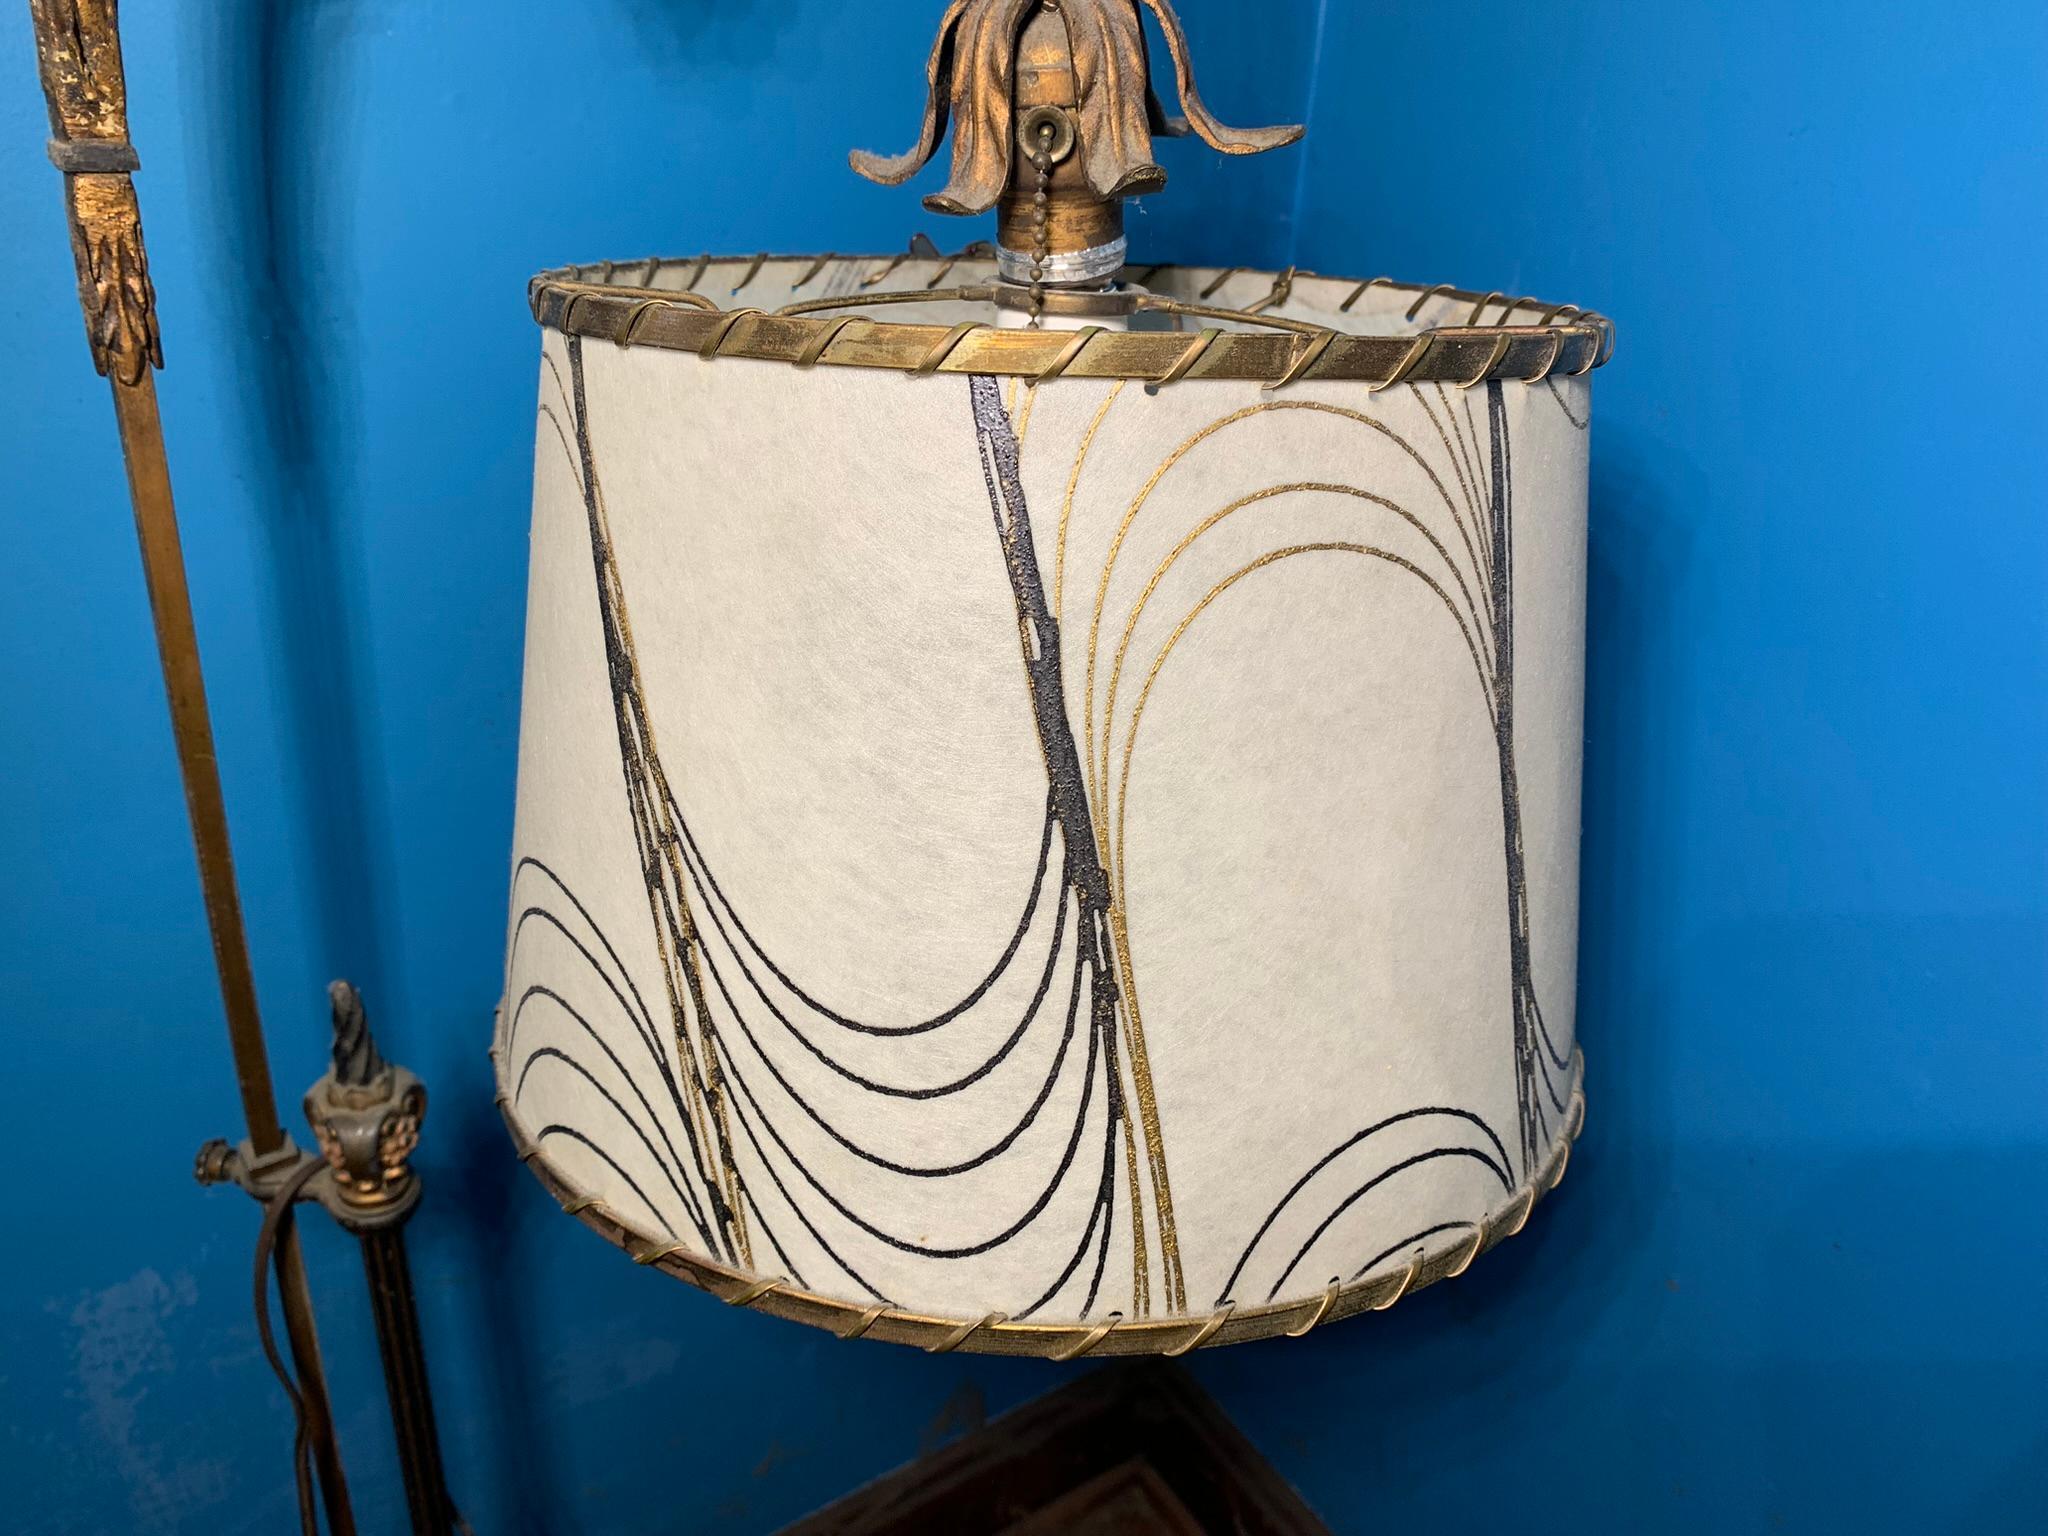 Vintage Floor Lamp with Shade